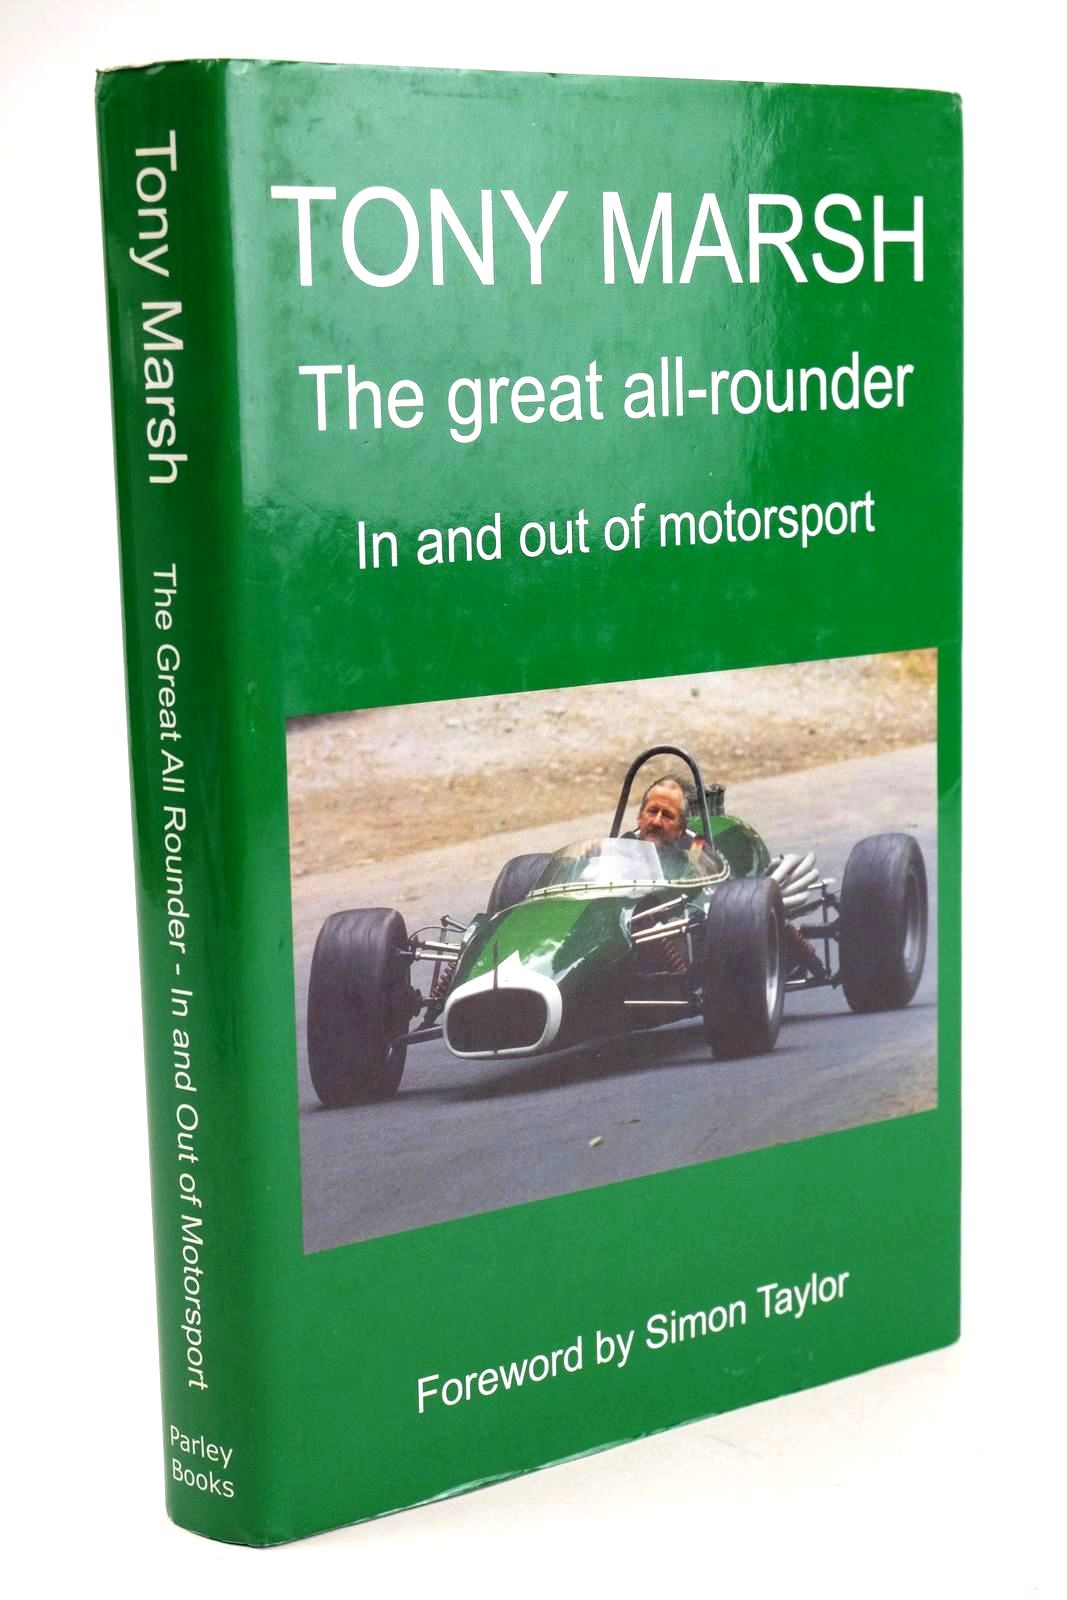 Photo of TONY MARSH, THE GREAT ALL-ROUNDER IN AND OUT OF MOTORSPORT written by Marsh, Tony published by Parley Books (STOCK CODE: 1324170)  for sale by Stella & Rose's Books